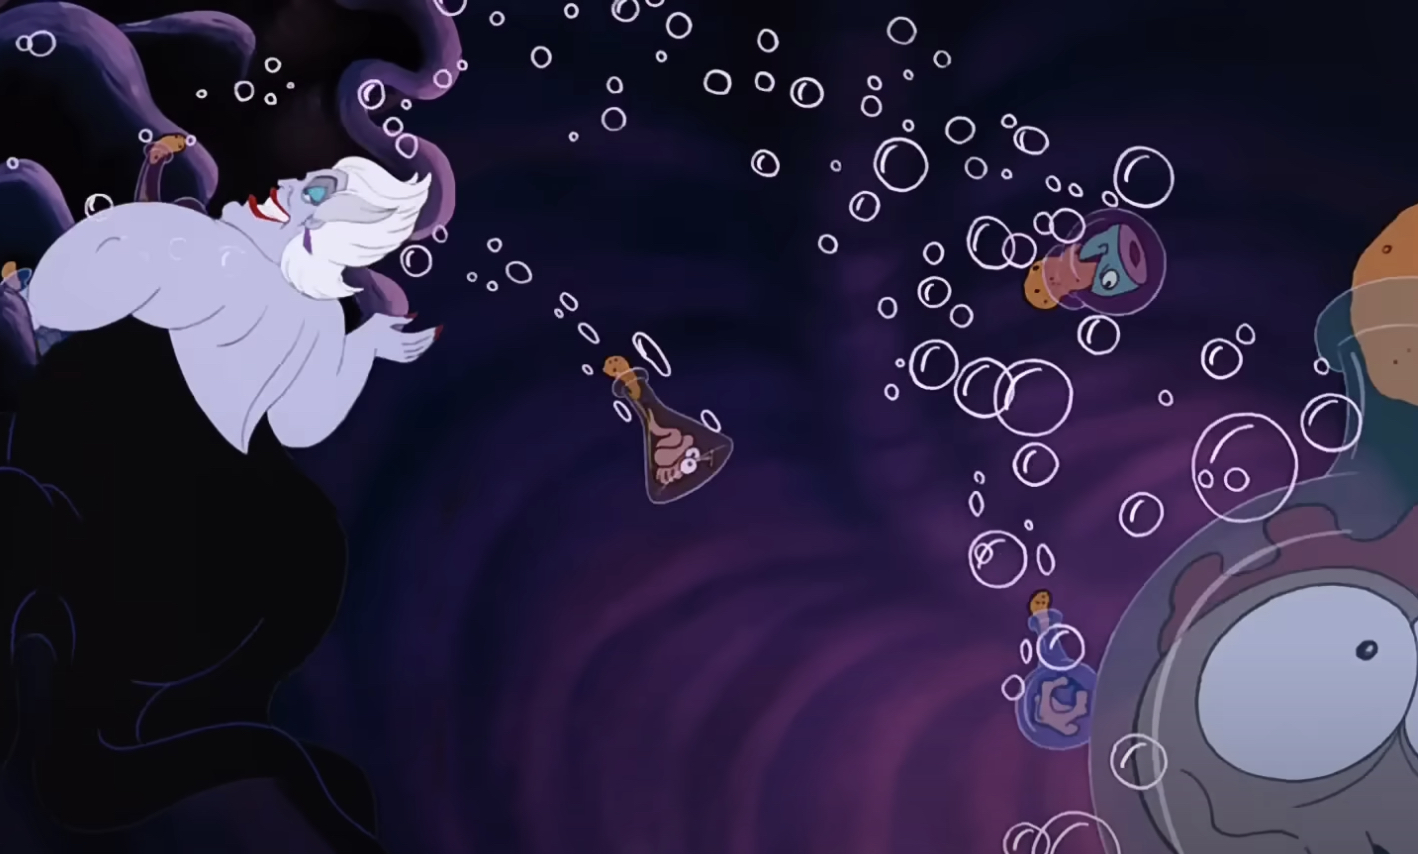 Ursula throwing glass bottles underwater forming bubbles